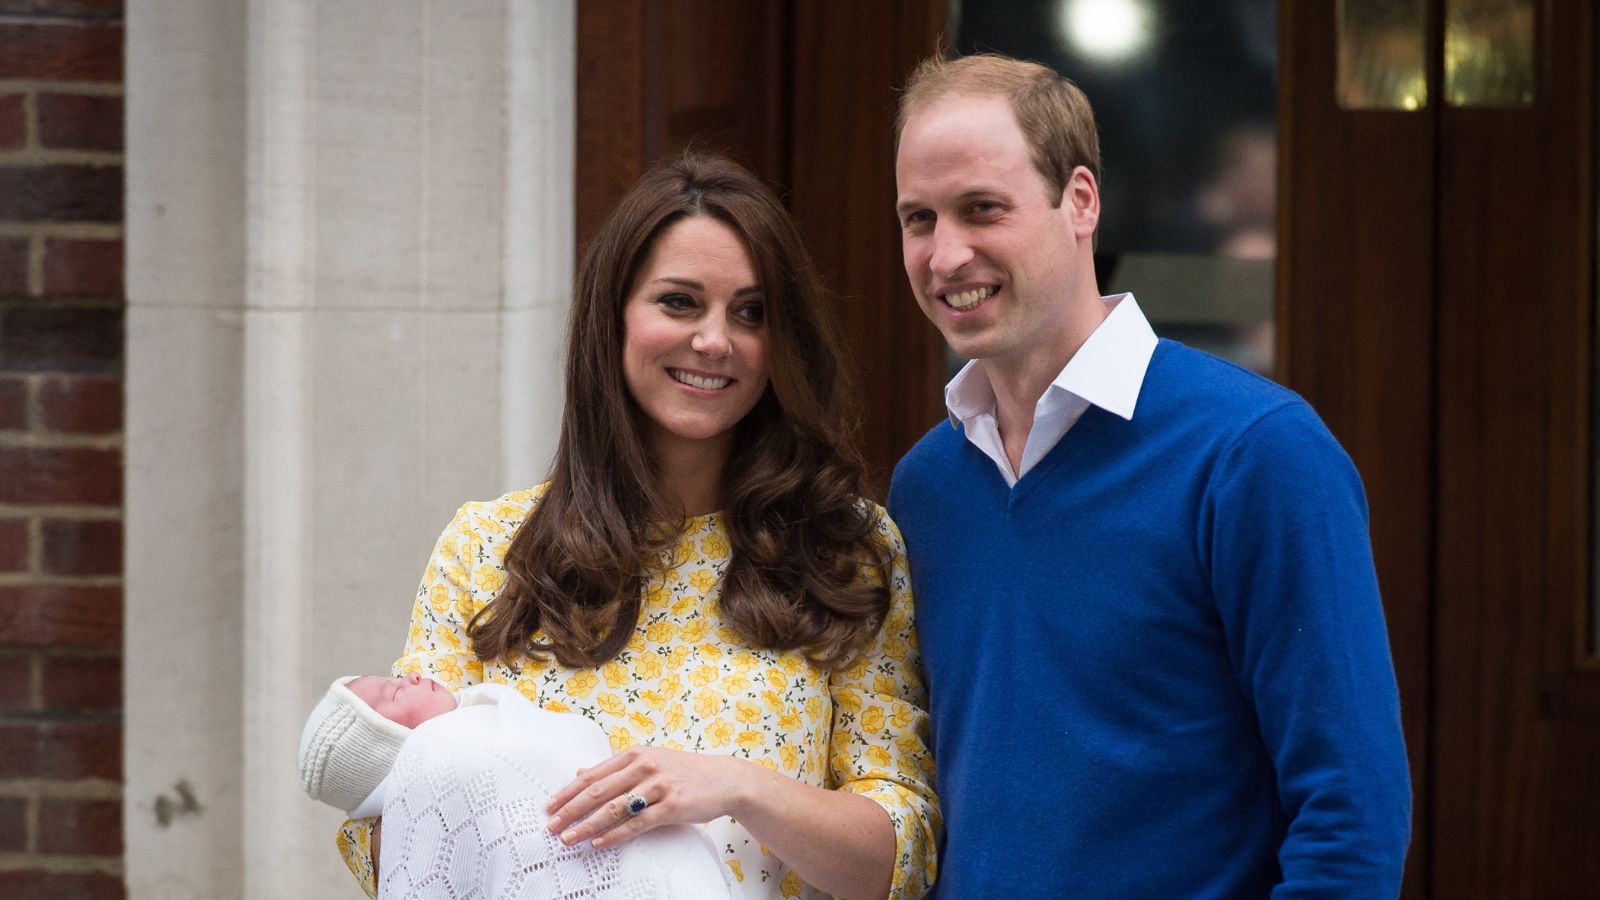 Kate Middleton and Prince William’s relationship in pictures - Princess Charlotte is born